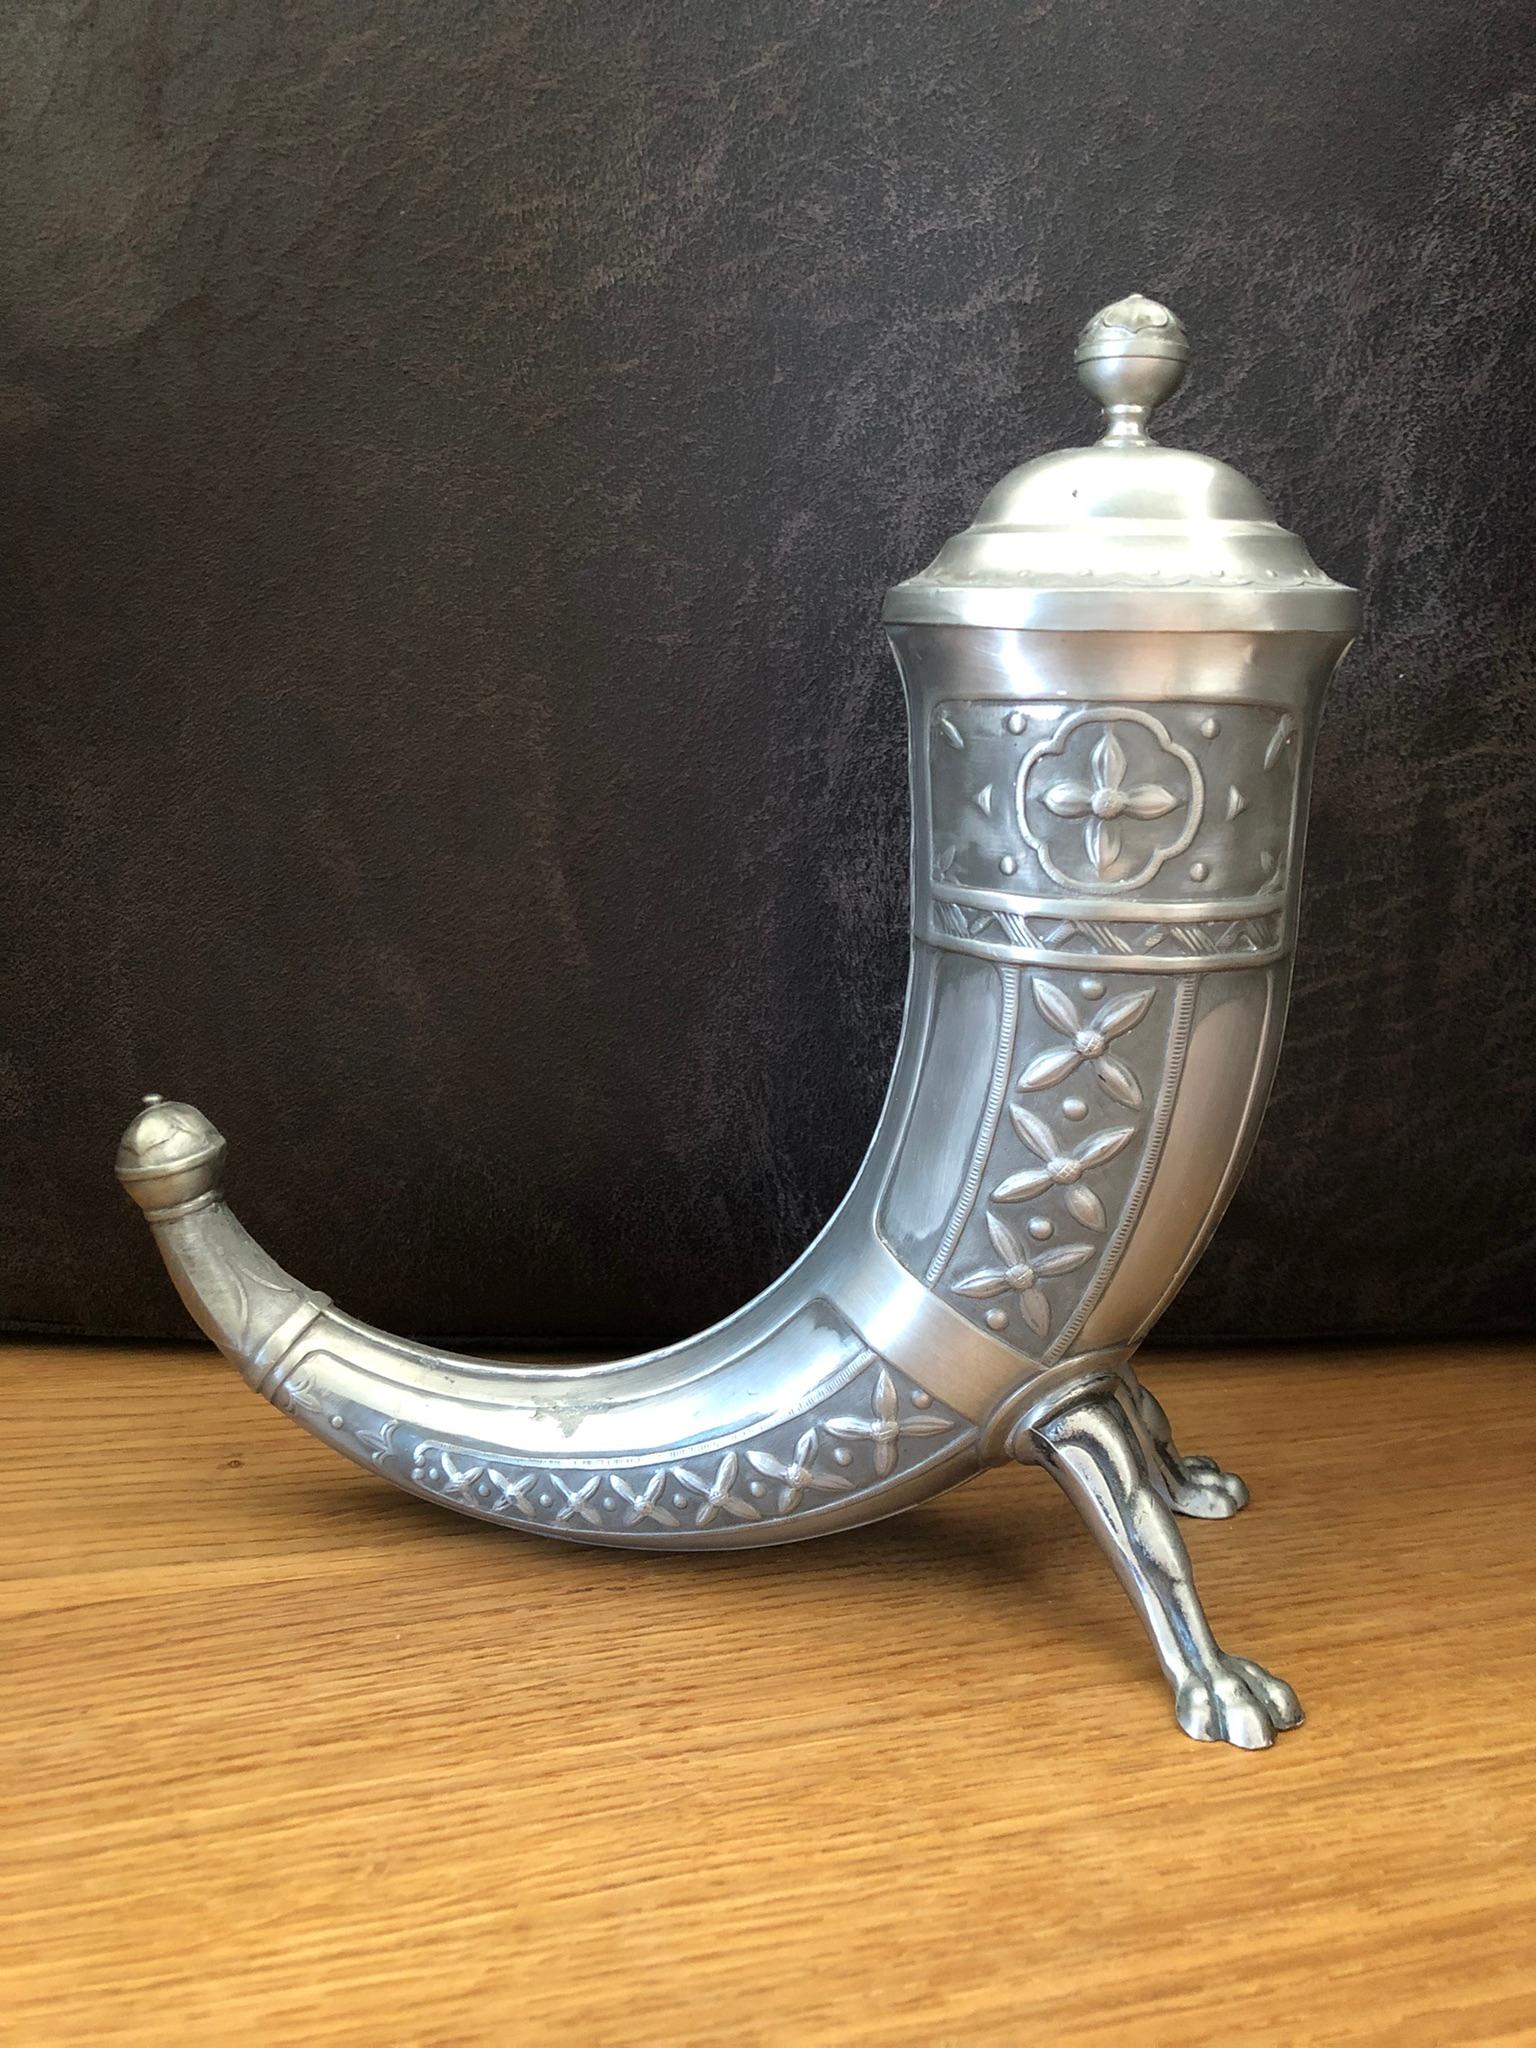 With a soft patina, this Aksel Holmsen Horn is a real treasure. It stands stable. the lid and tail are adorned with matching embellishments.